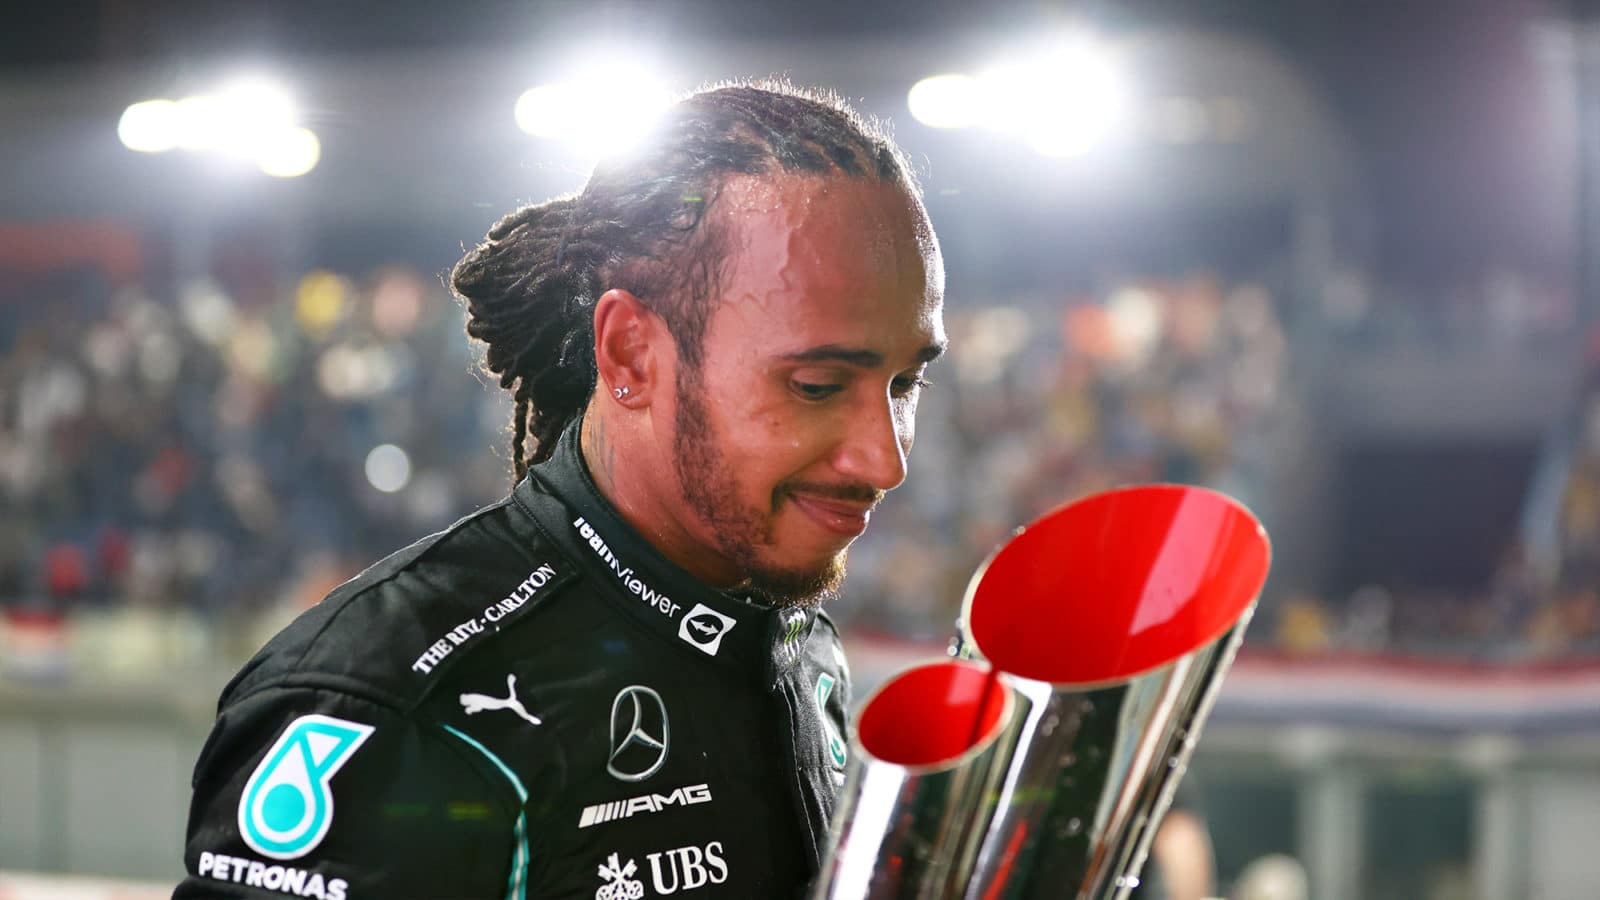 Lewis Hamilton with trophy after winning the 2021 Qatar Grand Prix